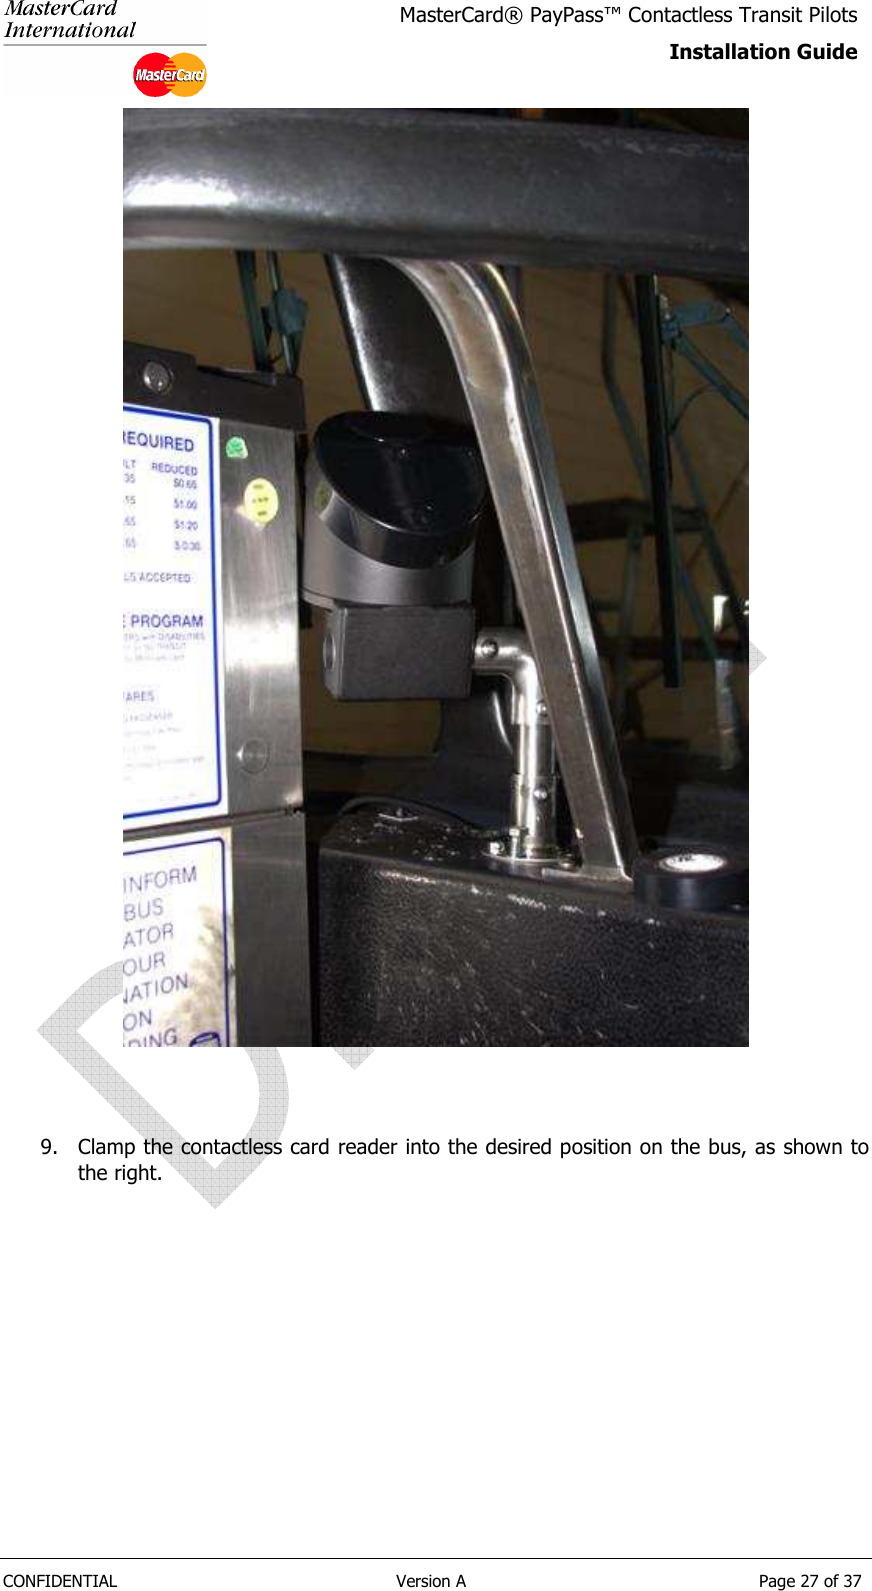   CONFIDENTIAL  Version A  Page 27 of 37 MasterCard® PayPass™ Contactless Transit Pilots Installation Guide     9. Clamp the contactless card reader into the desired position on the bus, as shown to the right.      